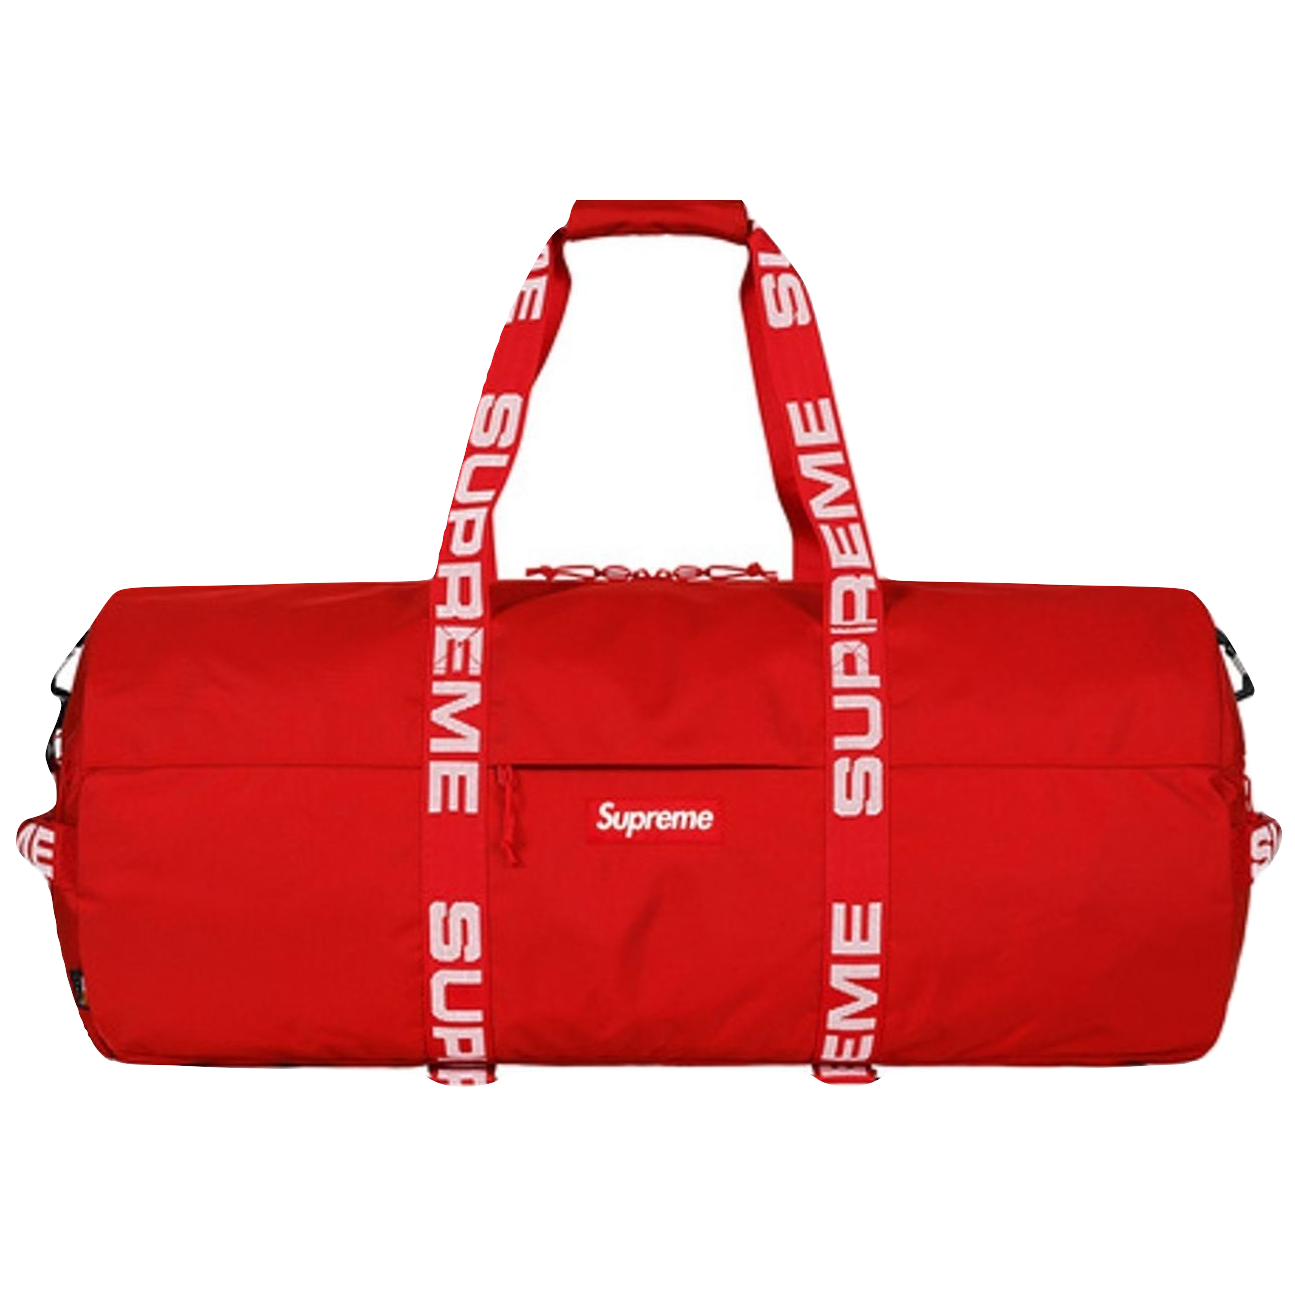 Supreme Large Duffle Bag SS18 - Red